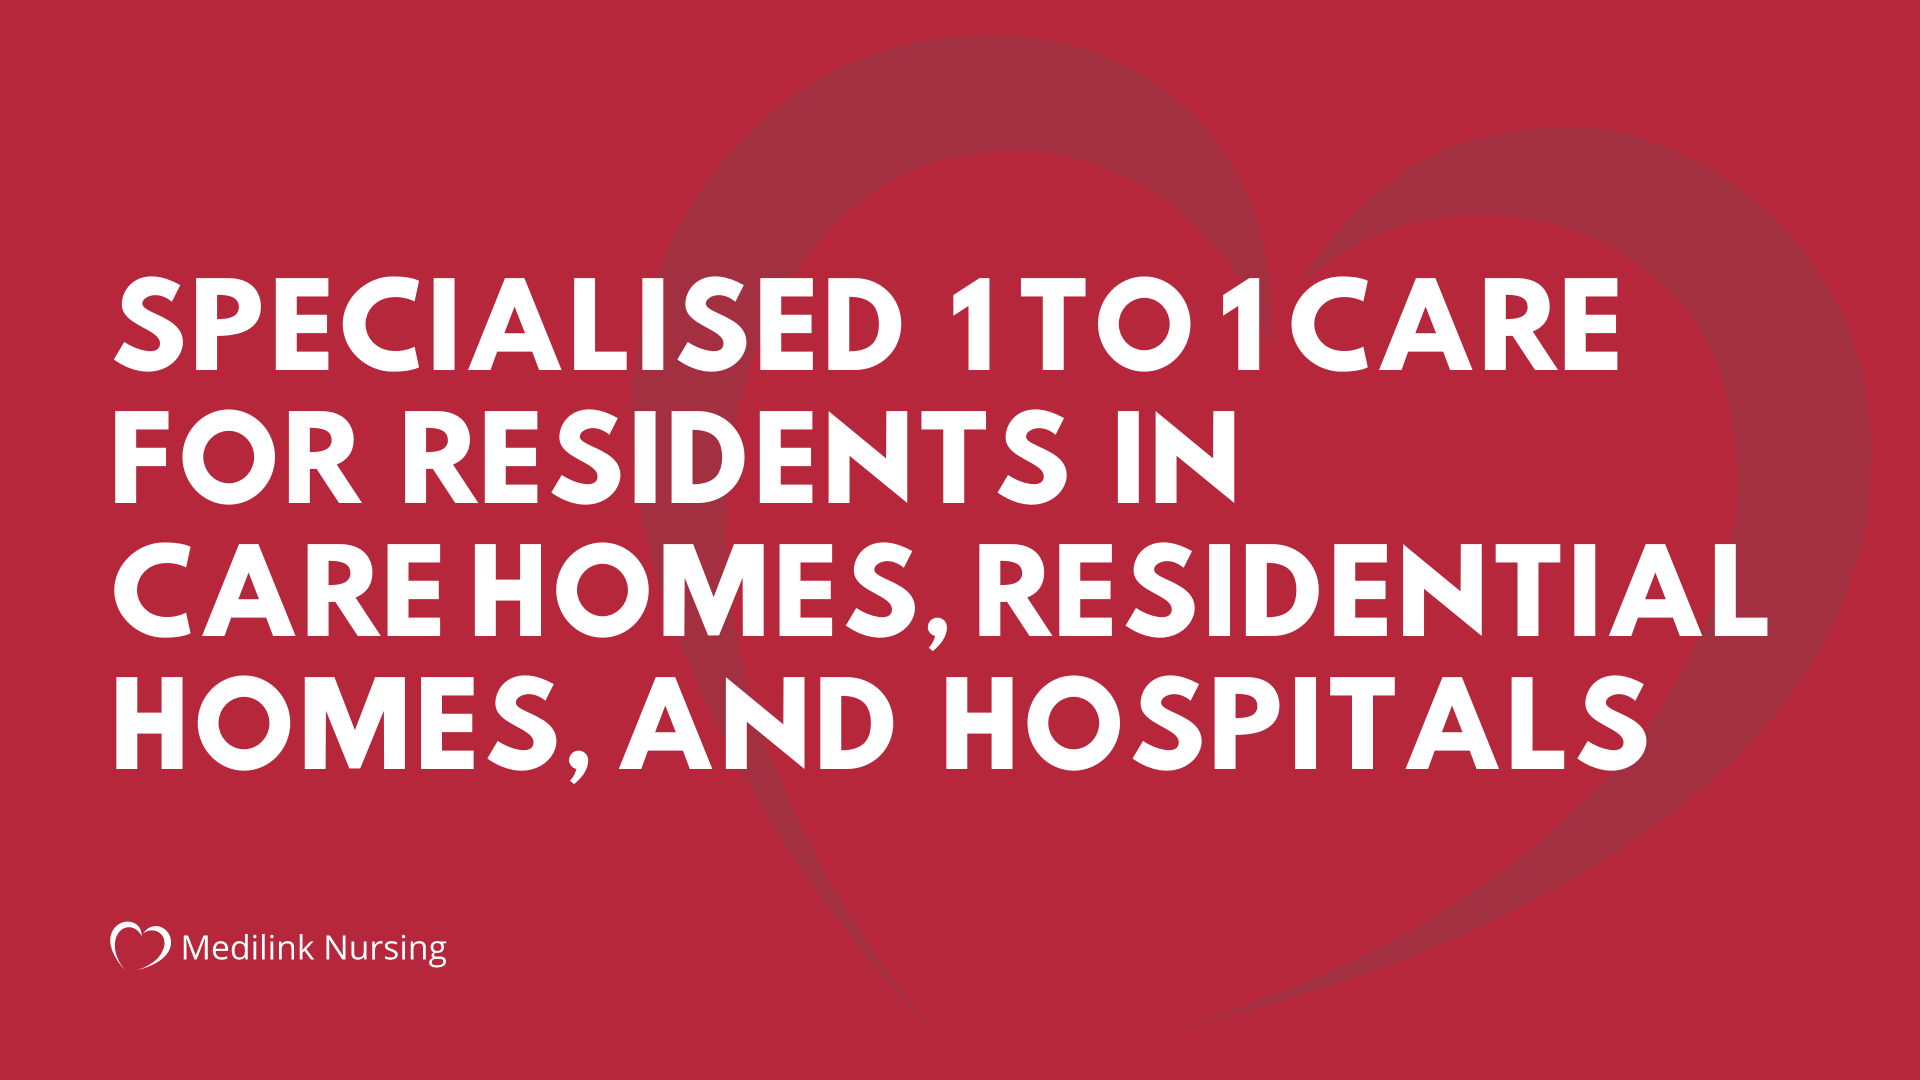 Specialised 1 to 1 Care For Residents In Care Homes, Residential Homes, and Hospitals